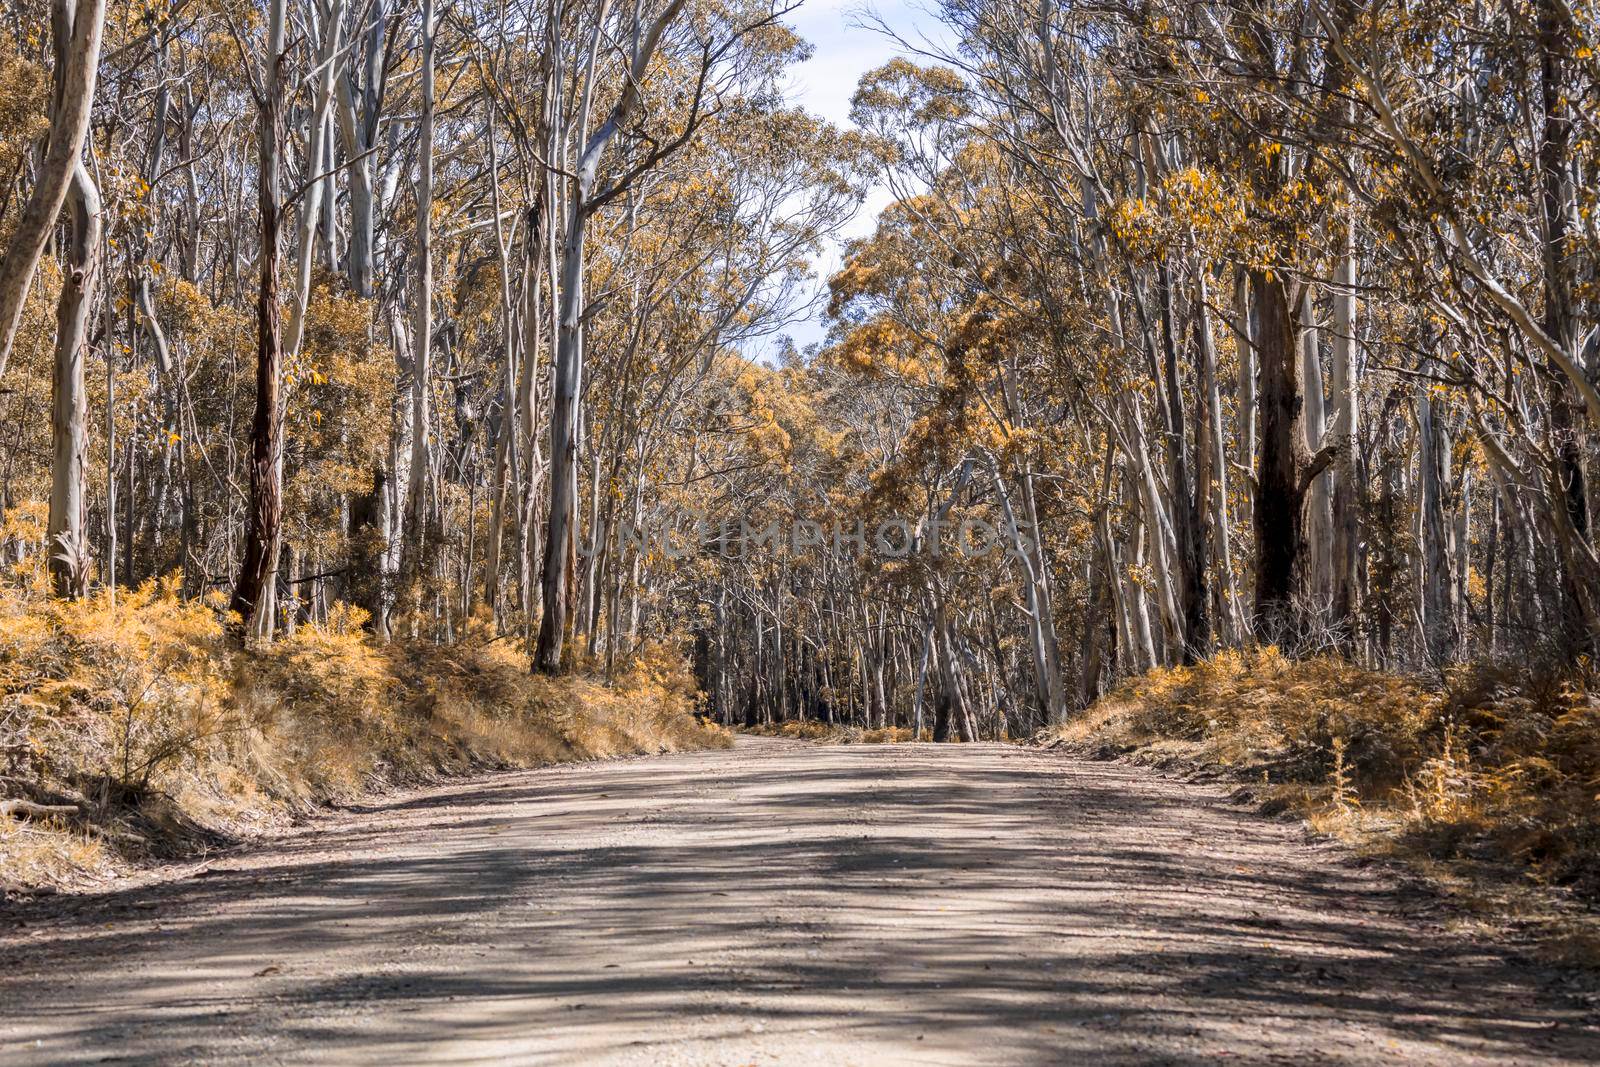 A long dirt road in a forest in Kanangra-Boyd National Park in regional Australia by WittkePhotos